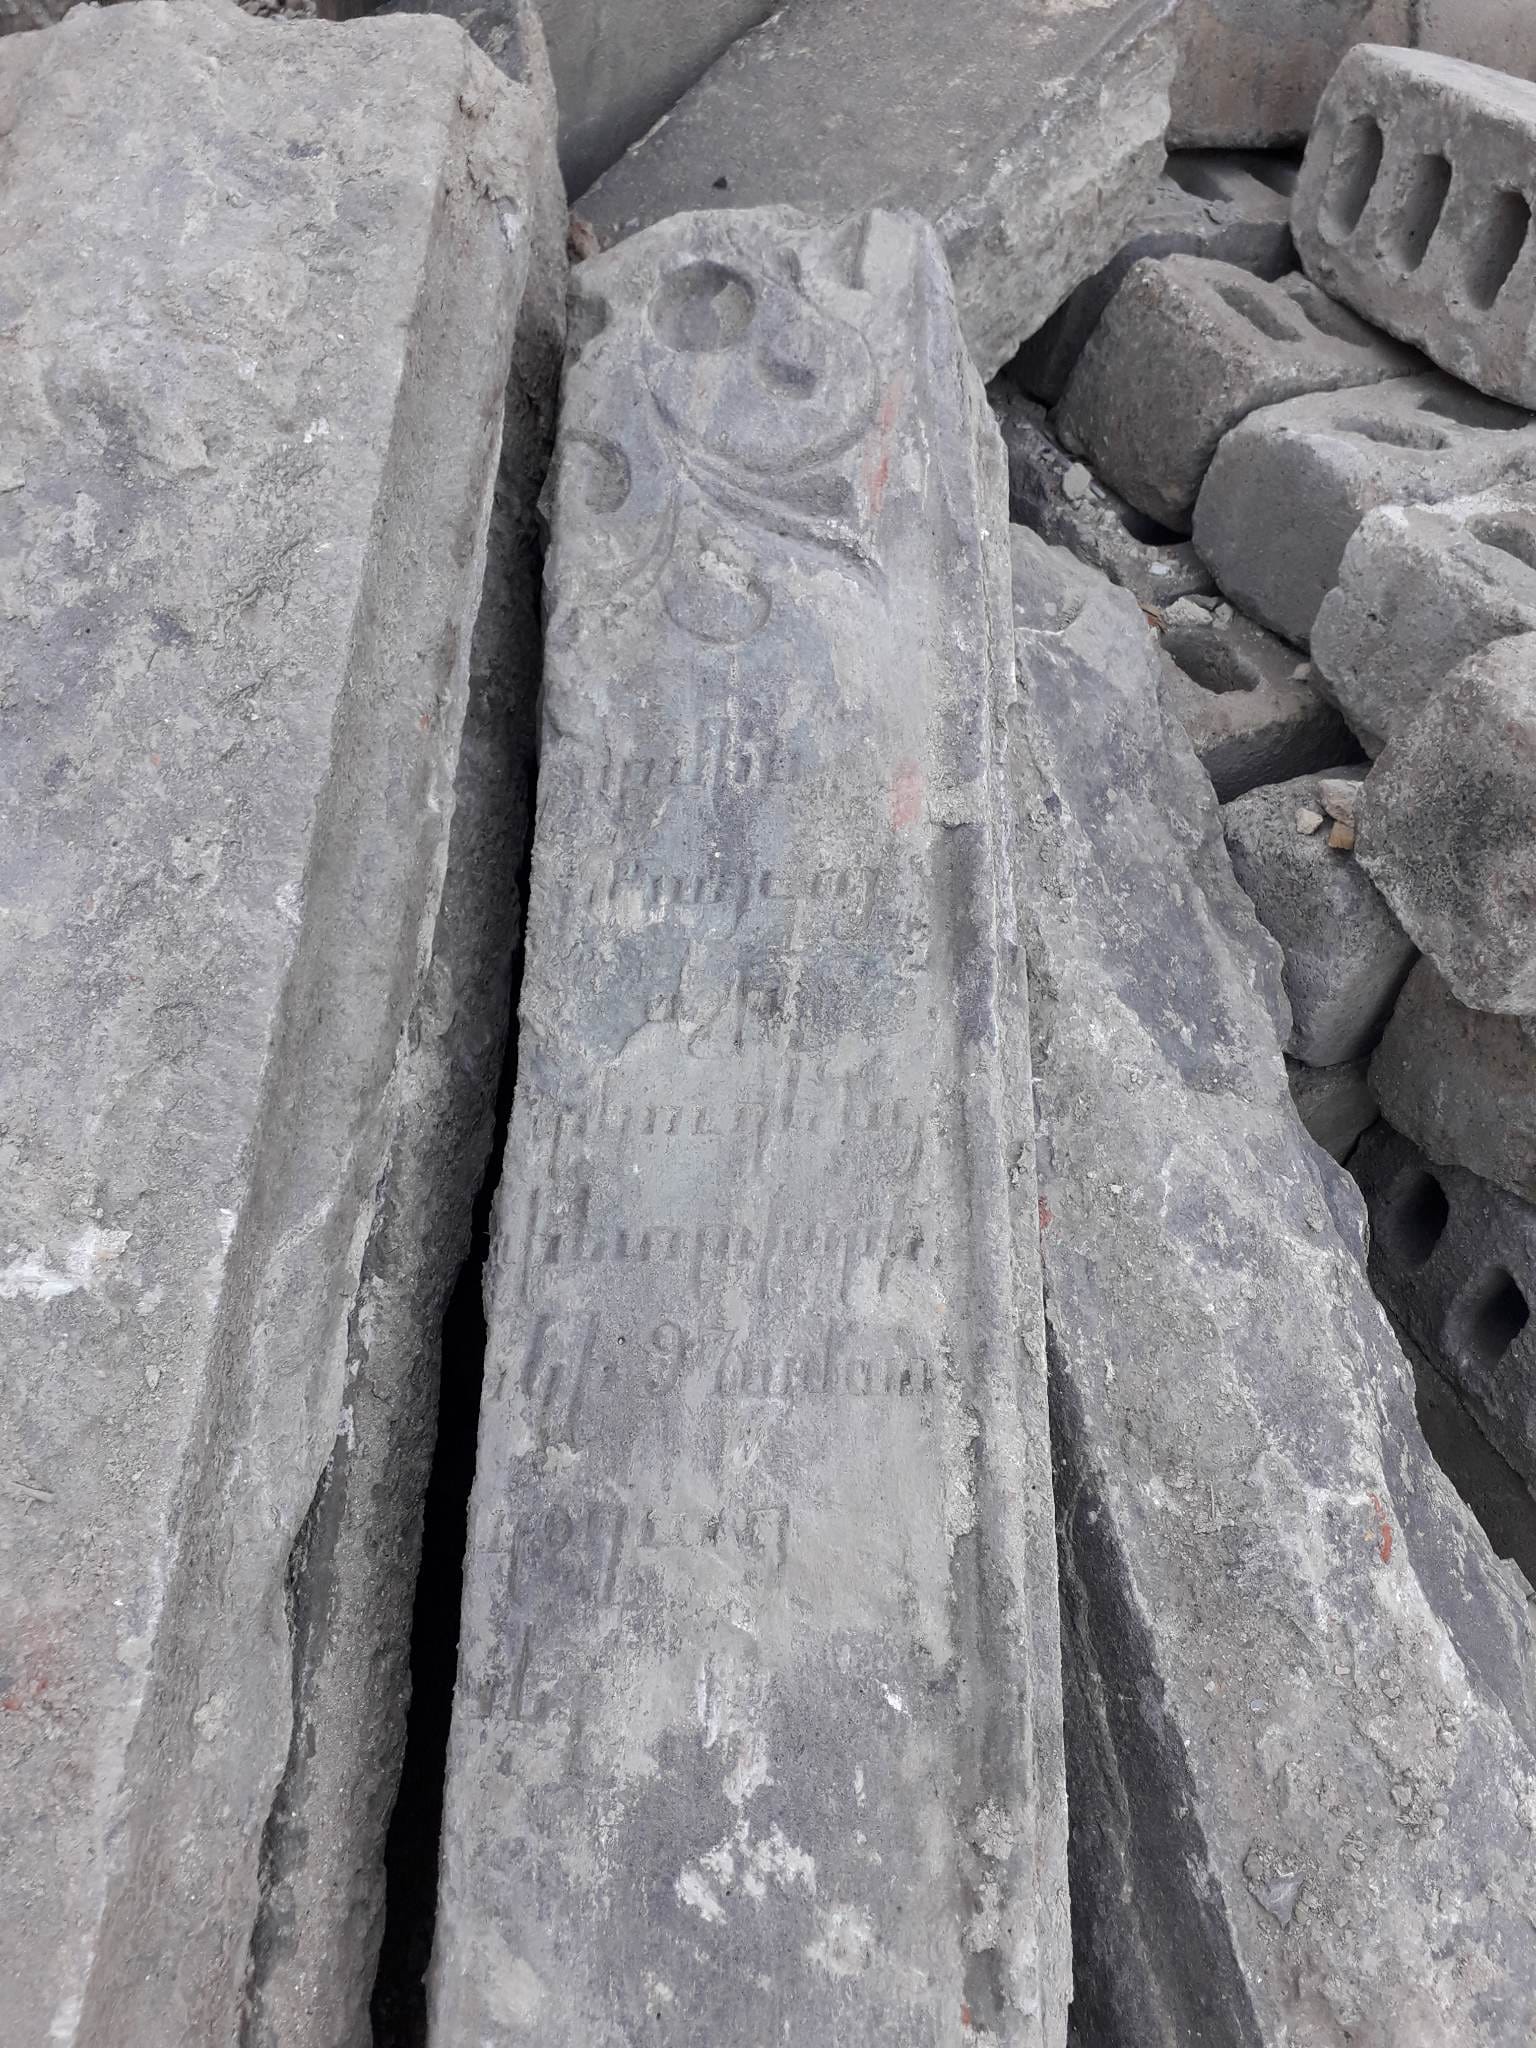 Remnants of Armenian gravestones discovered during construction work in Tbilisi 